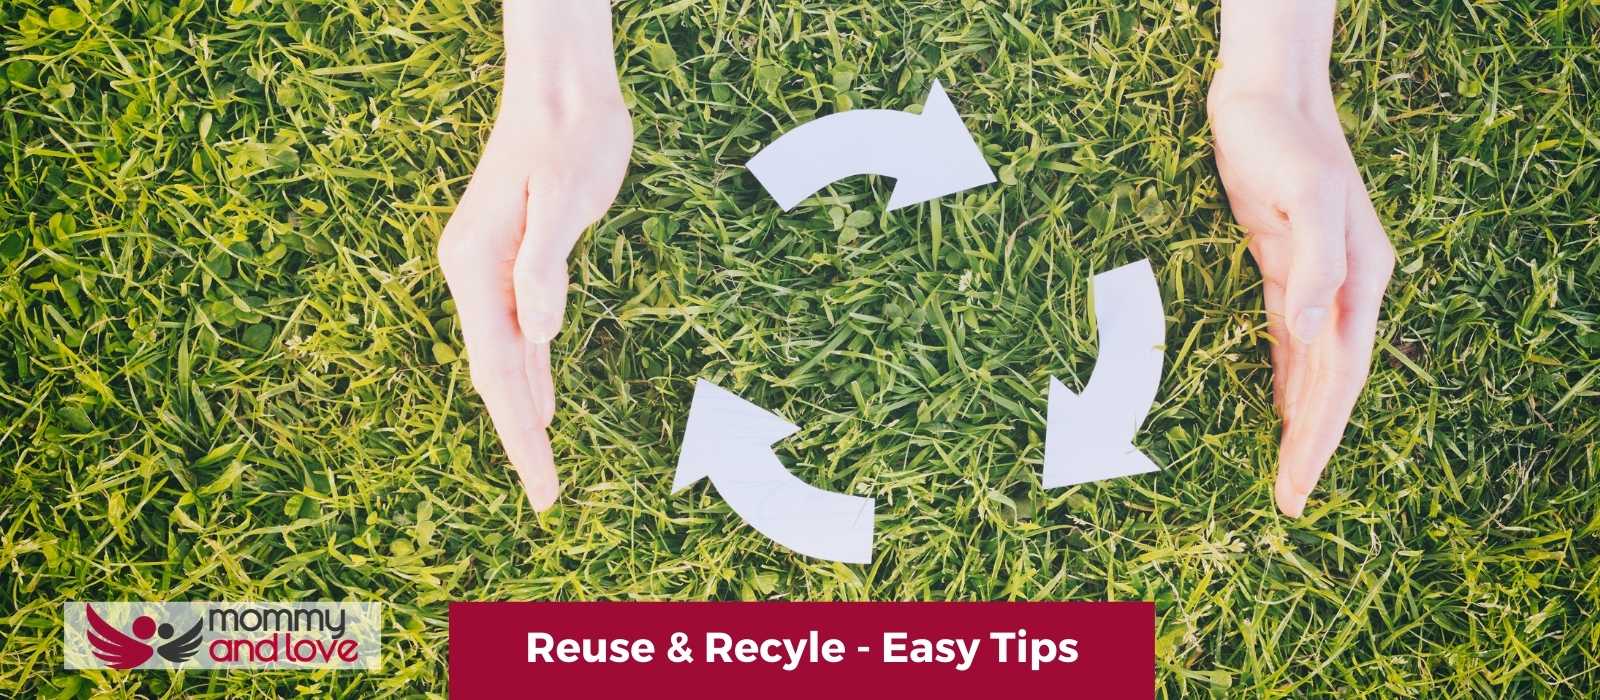 Reuse & Recyle - Easy Tips